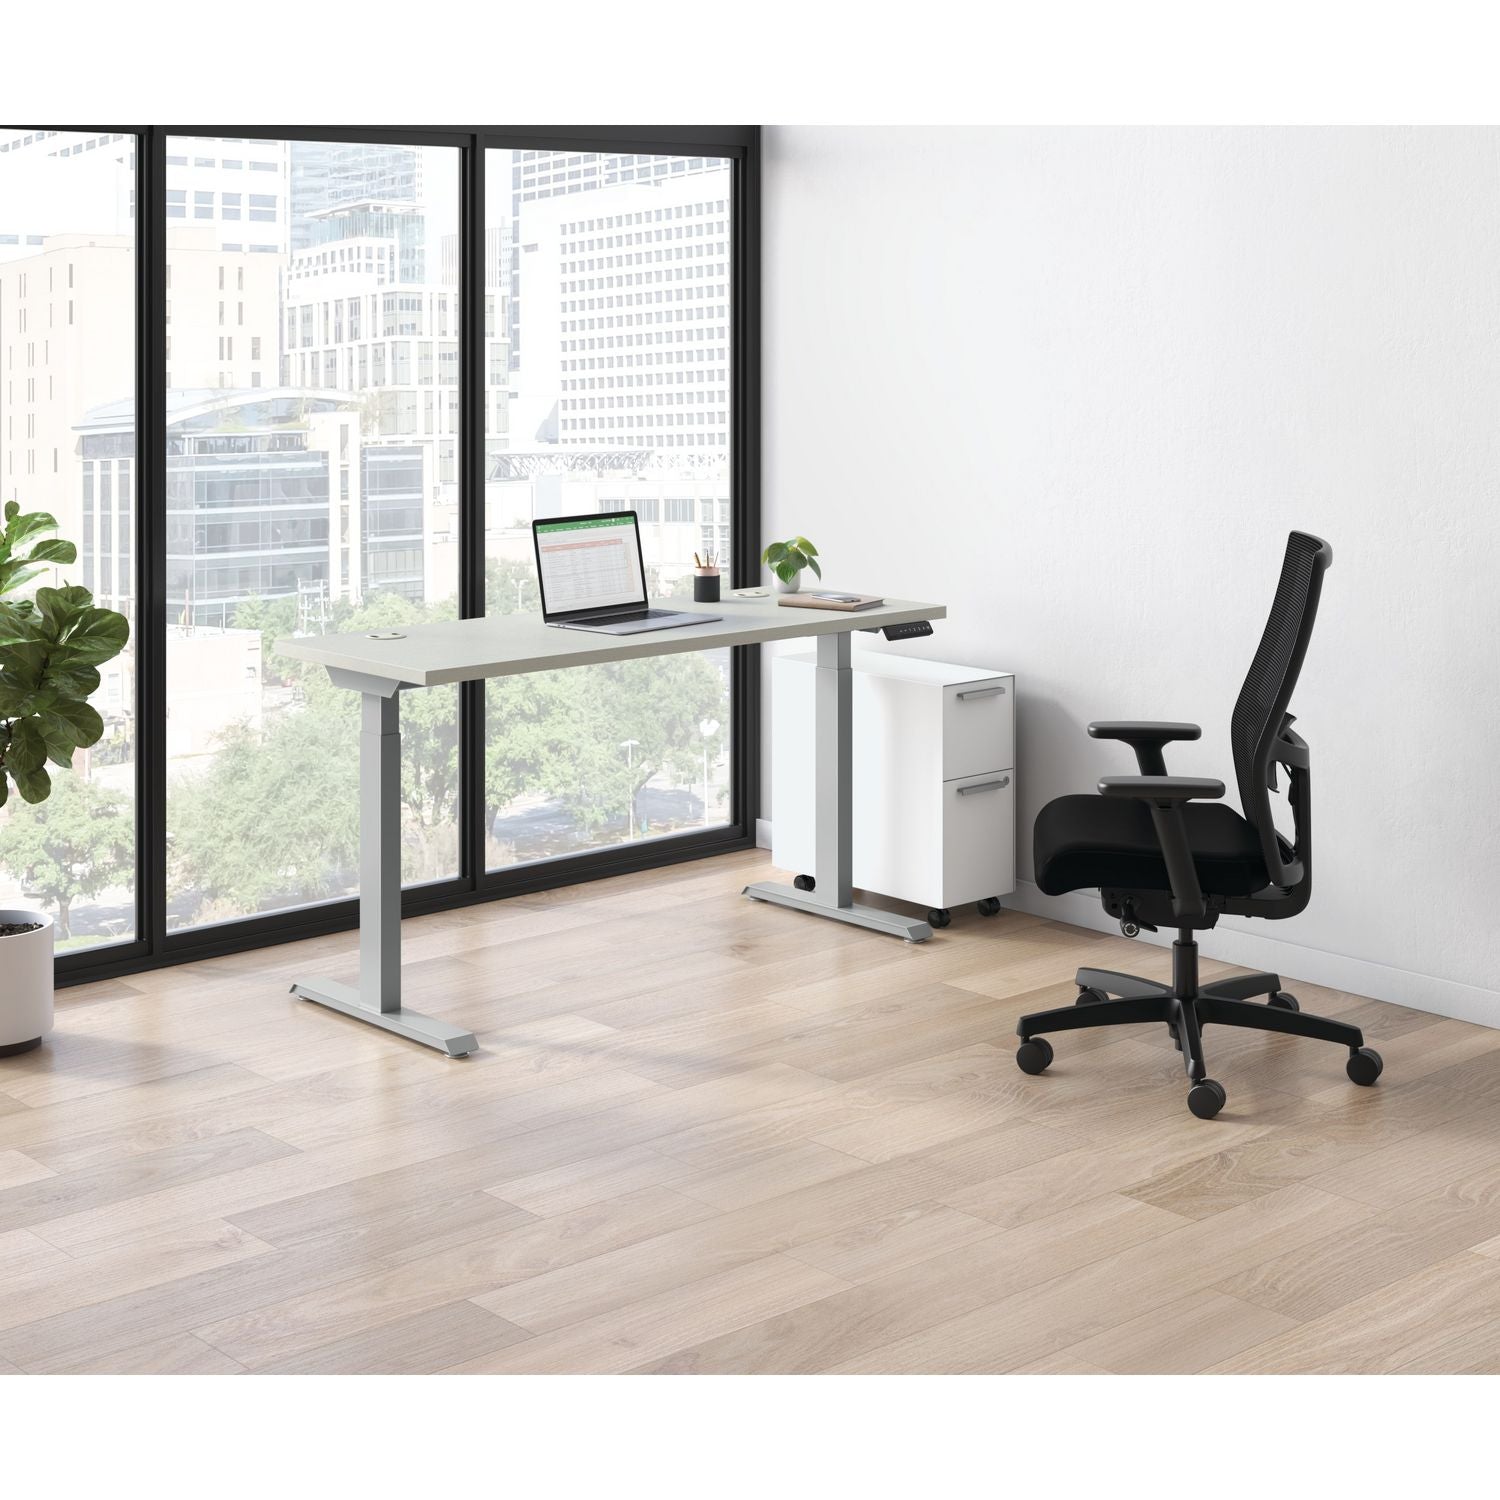 coordinate-height-adjustable-desk-bundle-2-stage-70-x-22-x-2775-to-47-silver-mesh\\silver-ships-in-7-10-business-days_honhat2smsv2270 - 6